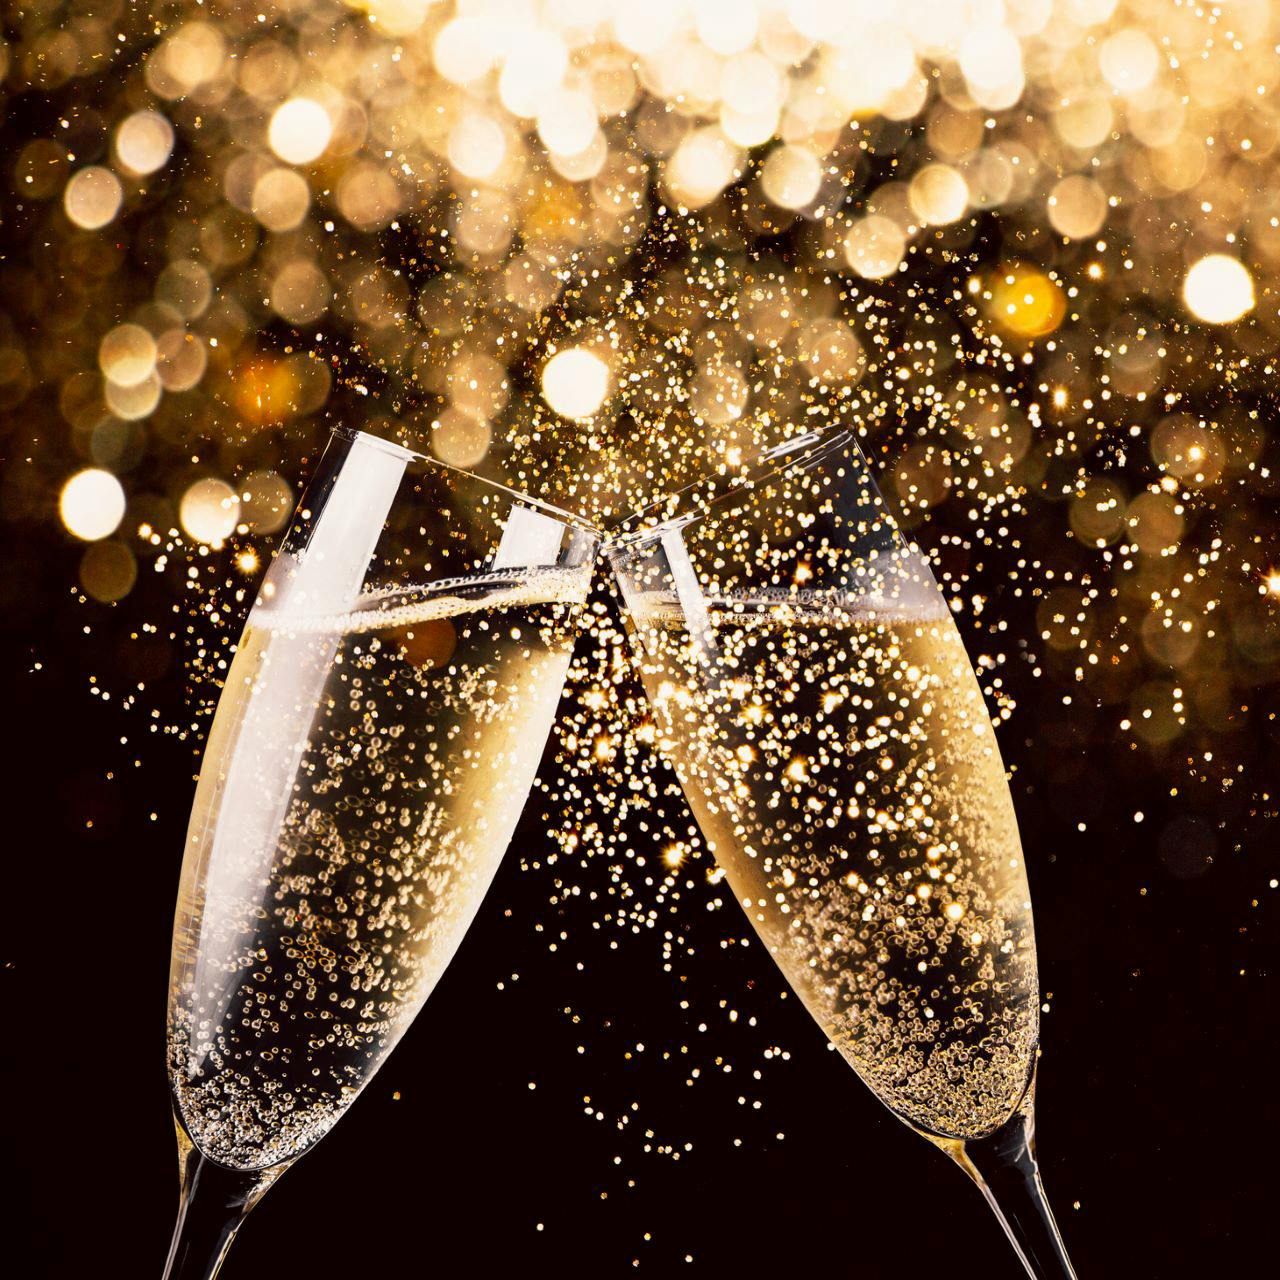 Champagne Wishes: The Tastes of Celebration